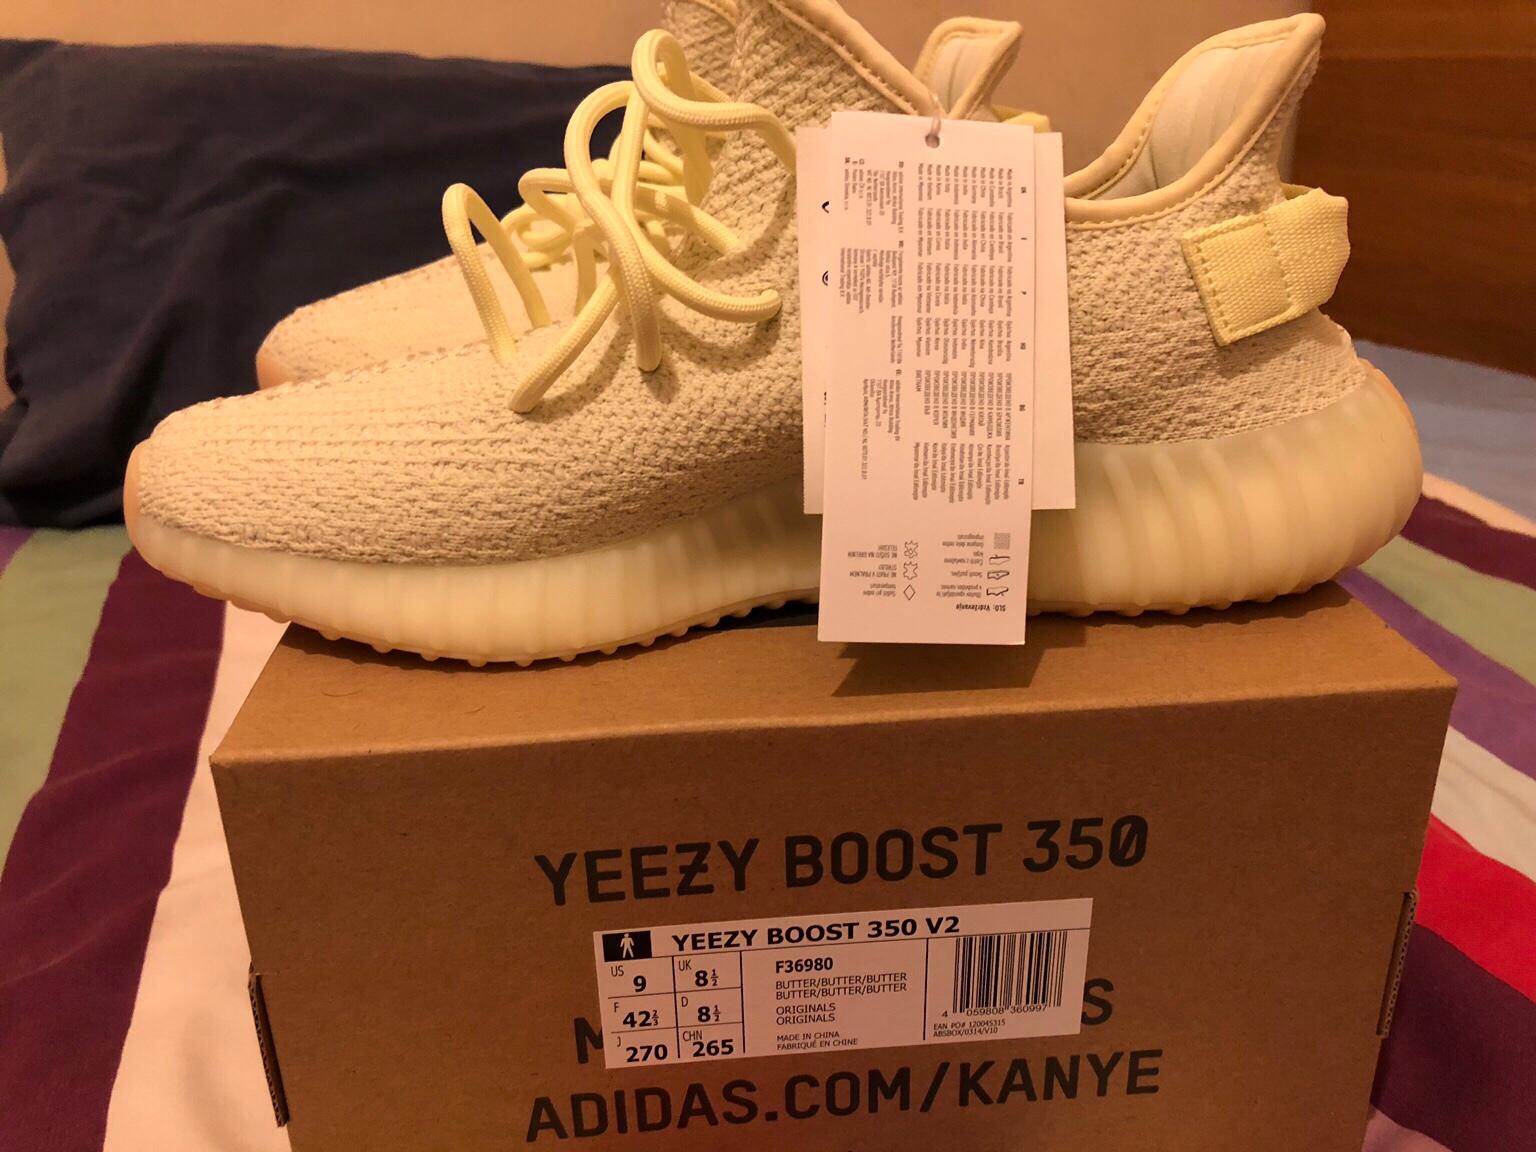 Adidas Yeezy Boost 350 v2 Butter Size 8 